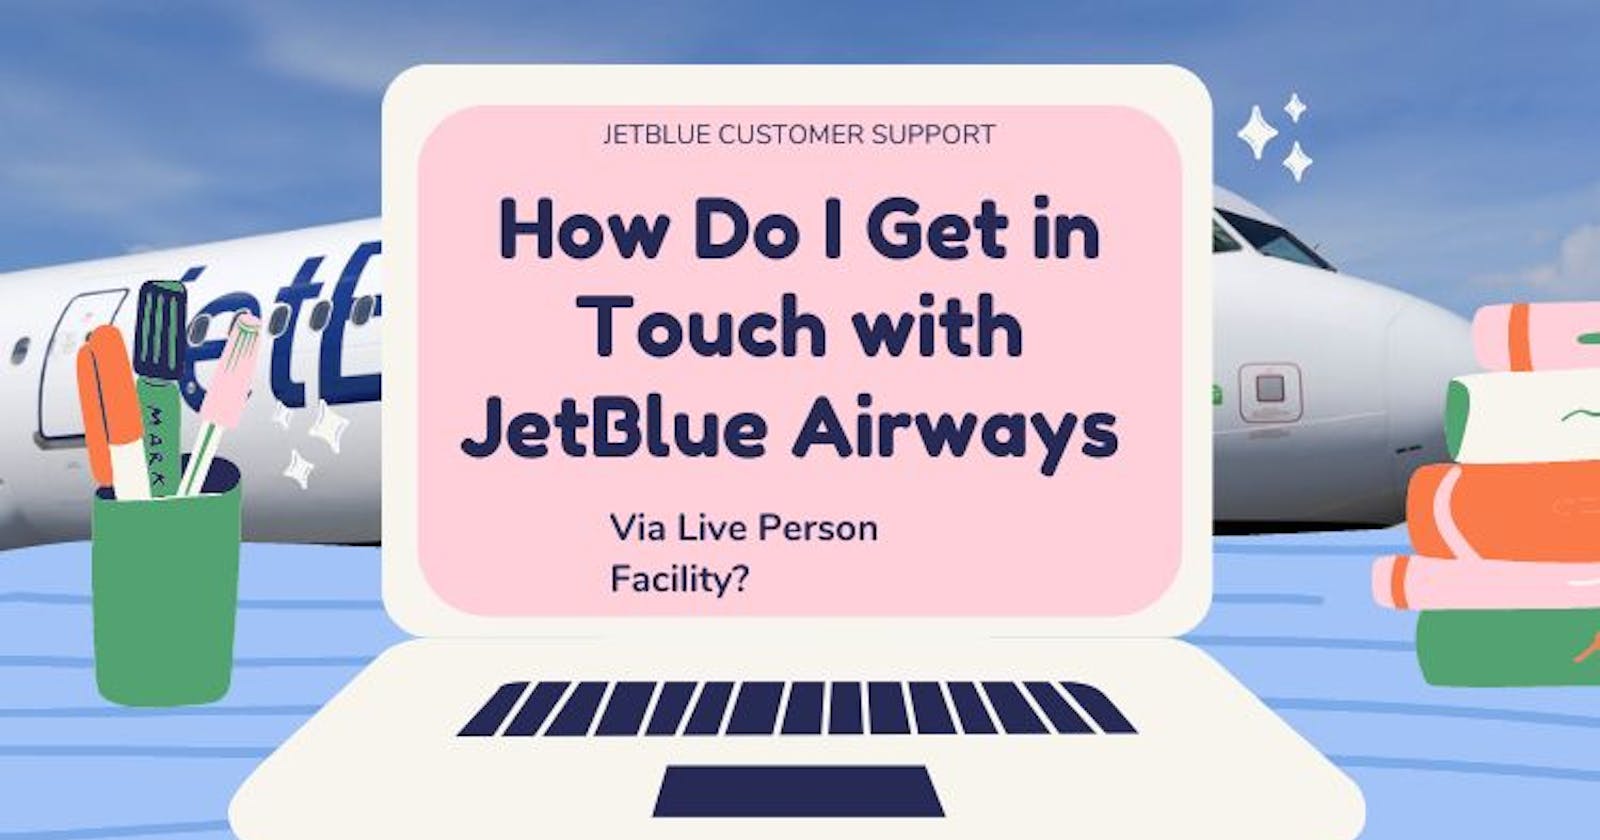 How Do I Get in Touch with JetBlue Airways Via a Live Person Facility?